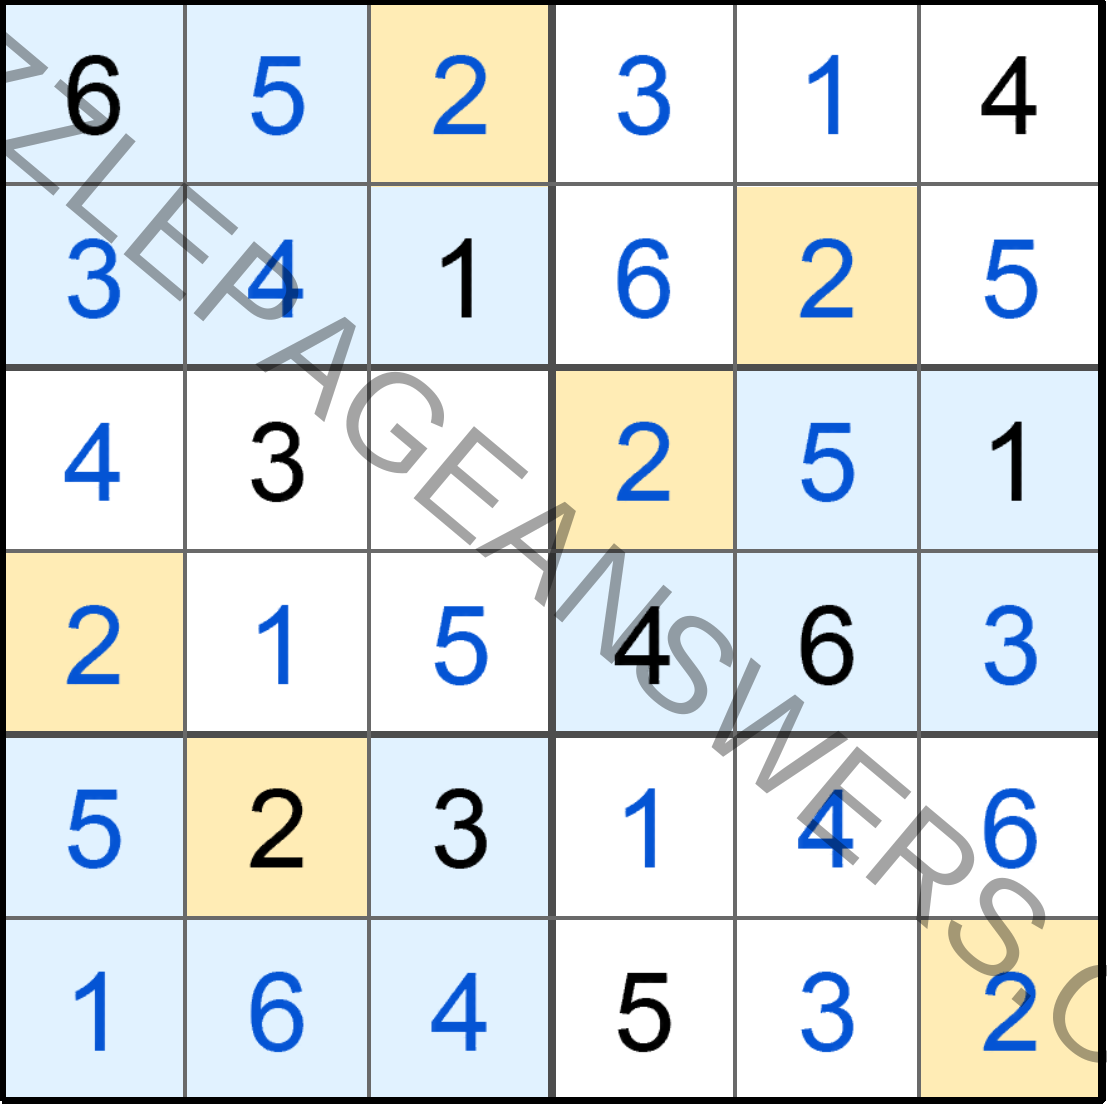 Puzzle Page Sudoku December 25 2020 Answers Puzzle Page Answers